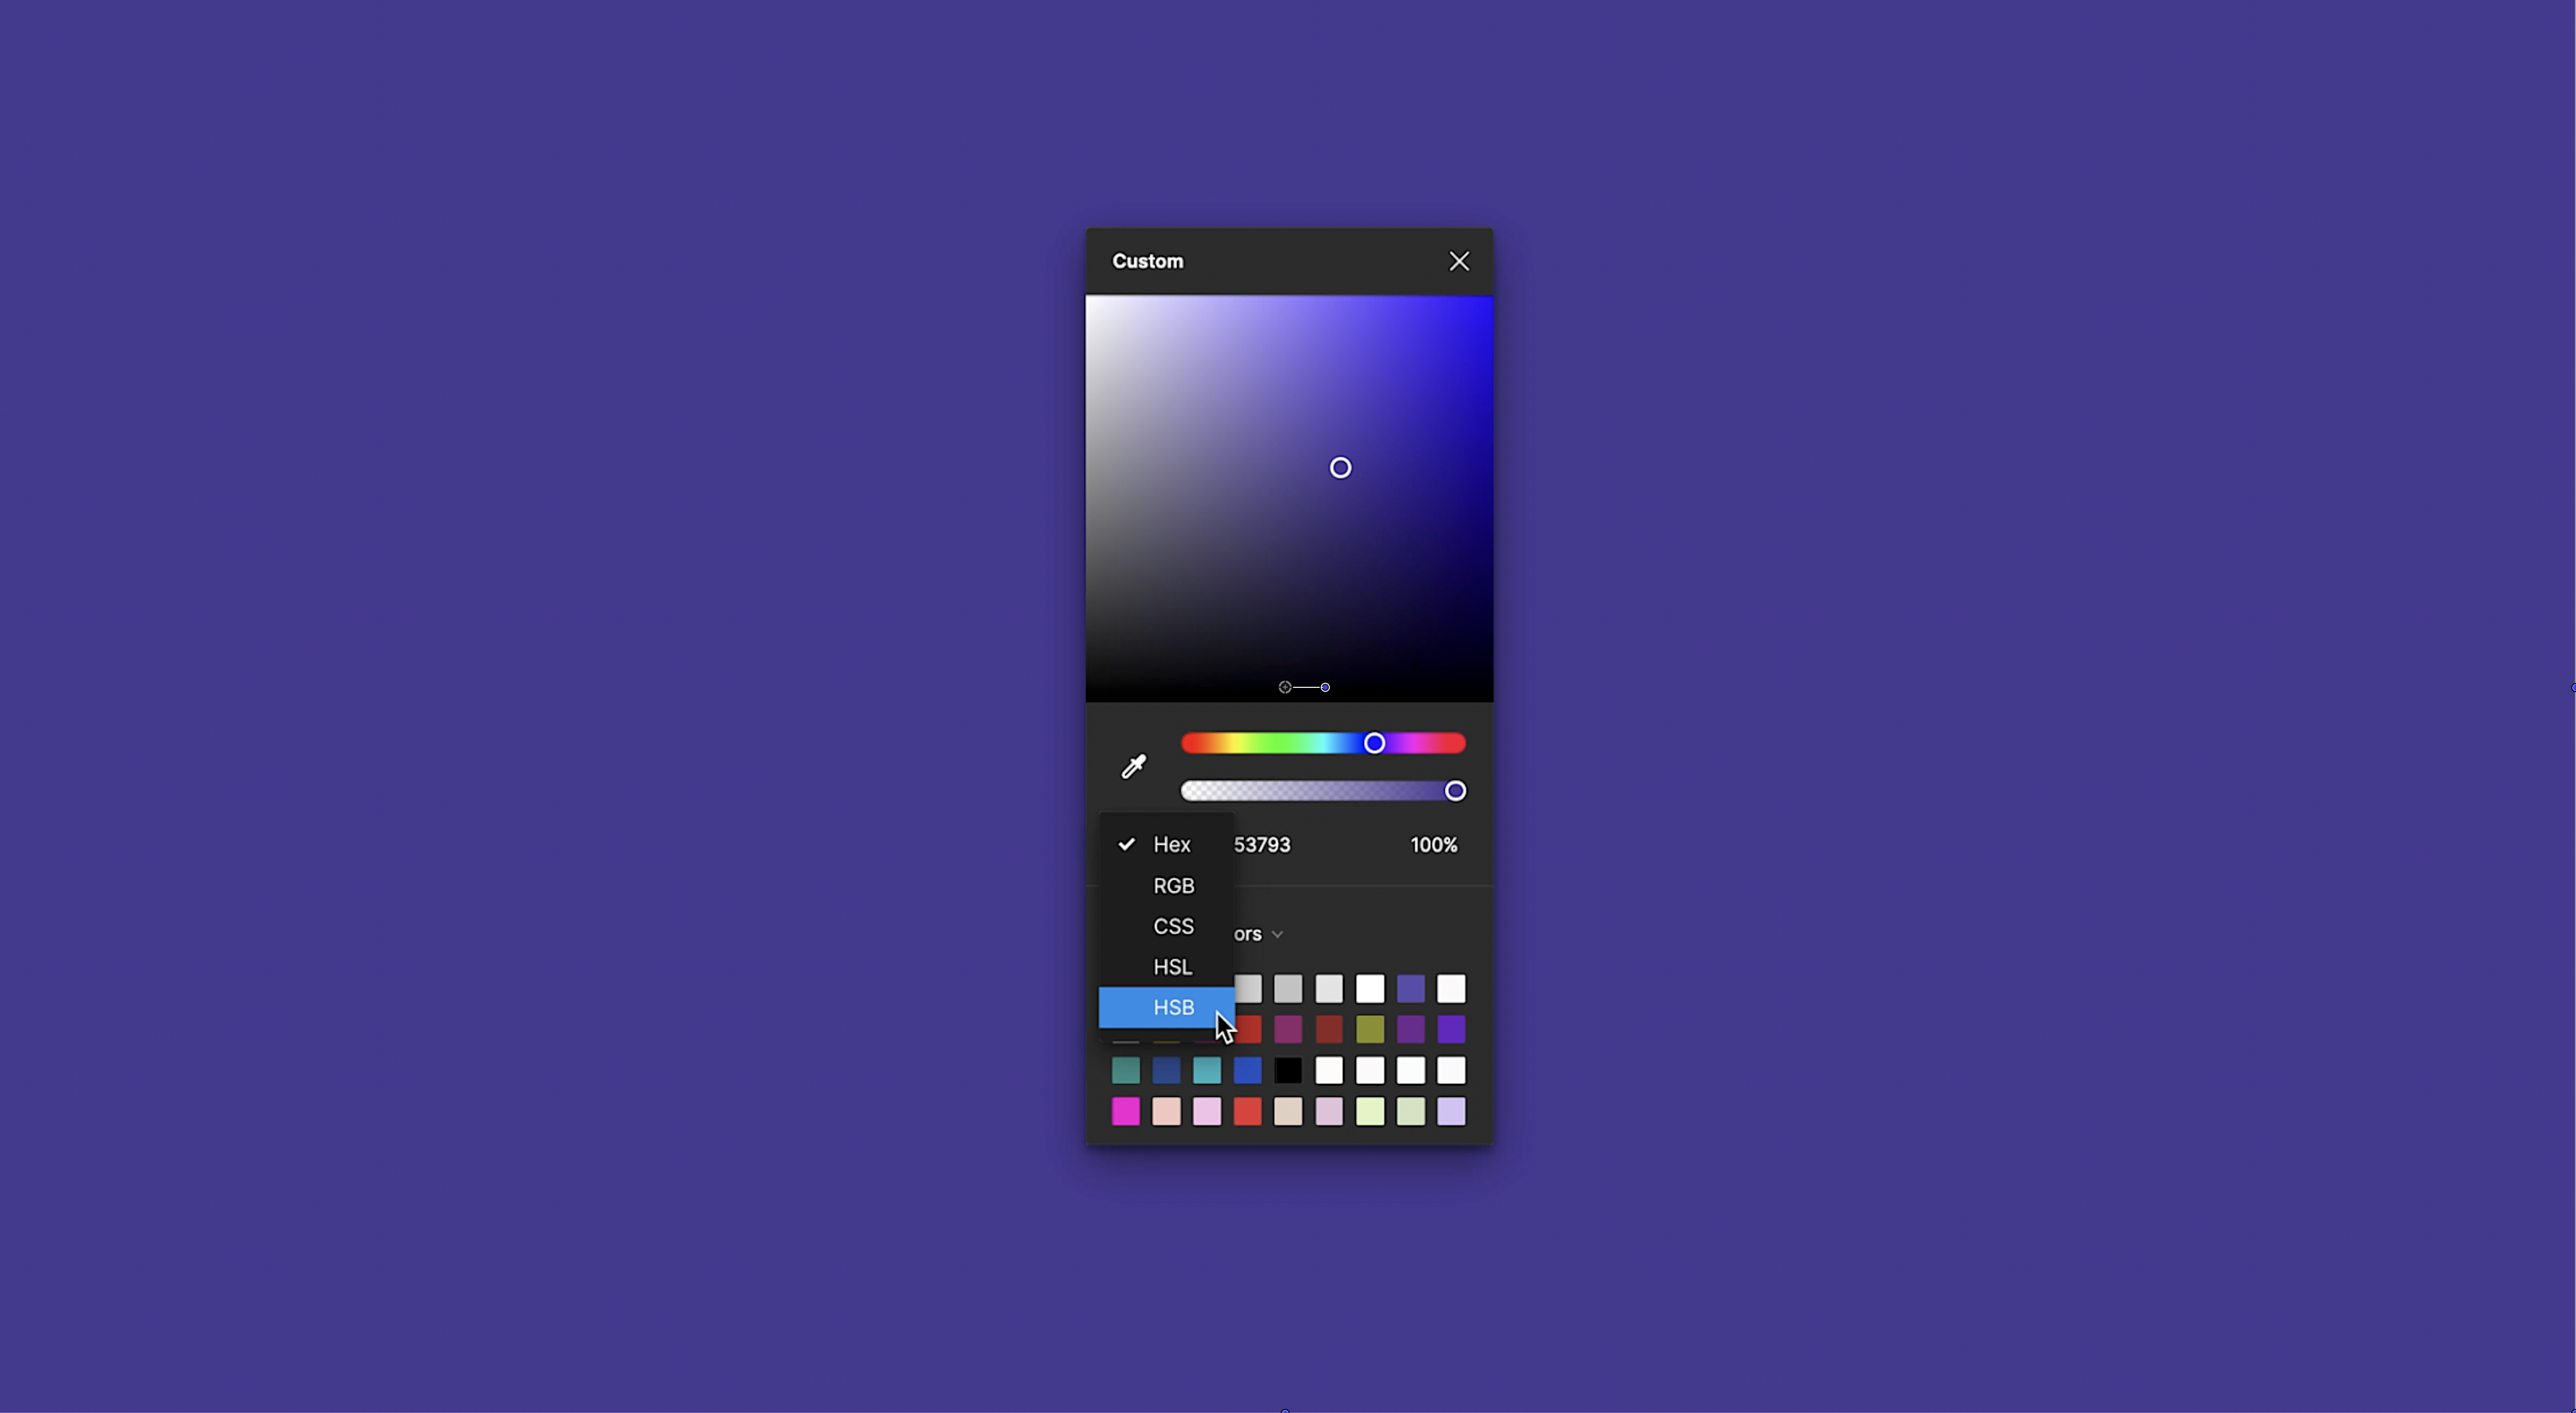 How To Pick Matching Color Palettes Every Time (No Plugins or Color Generators)